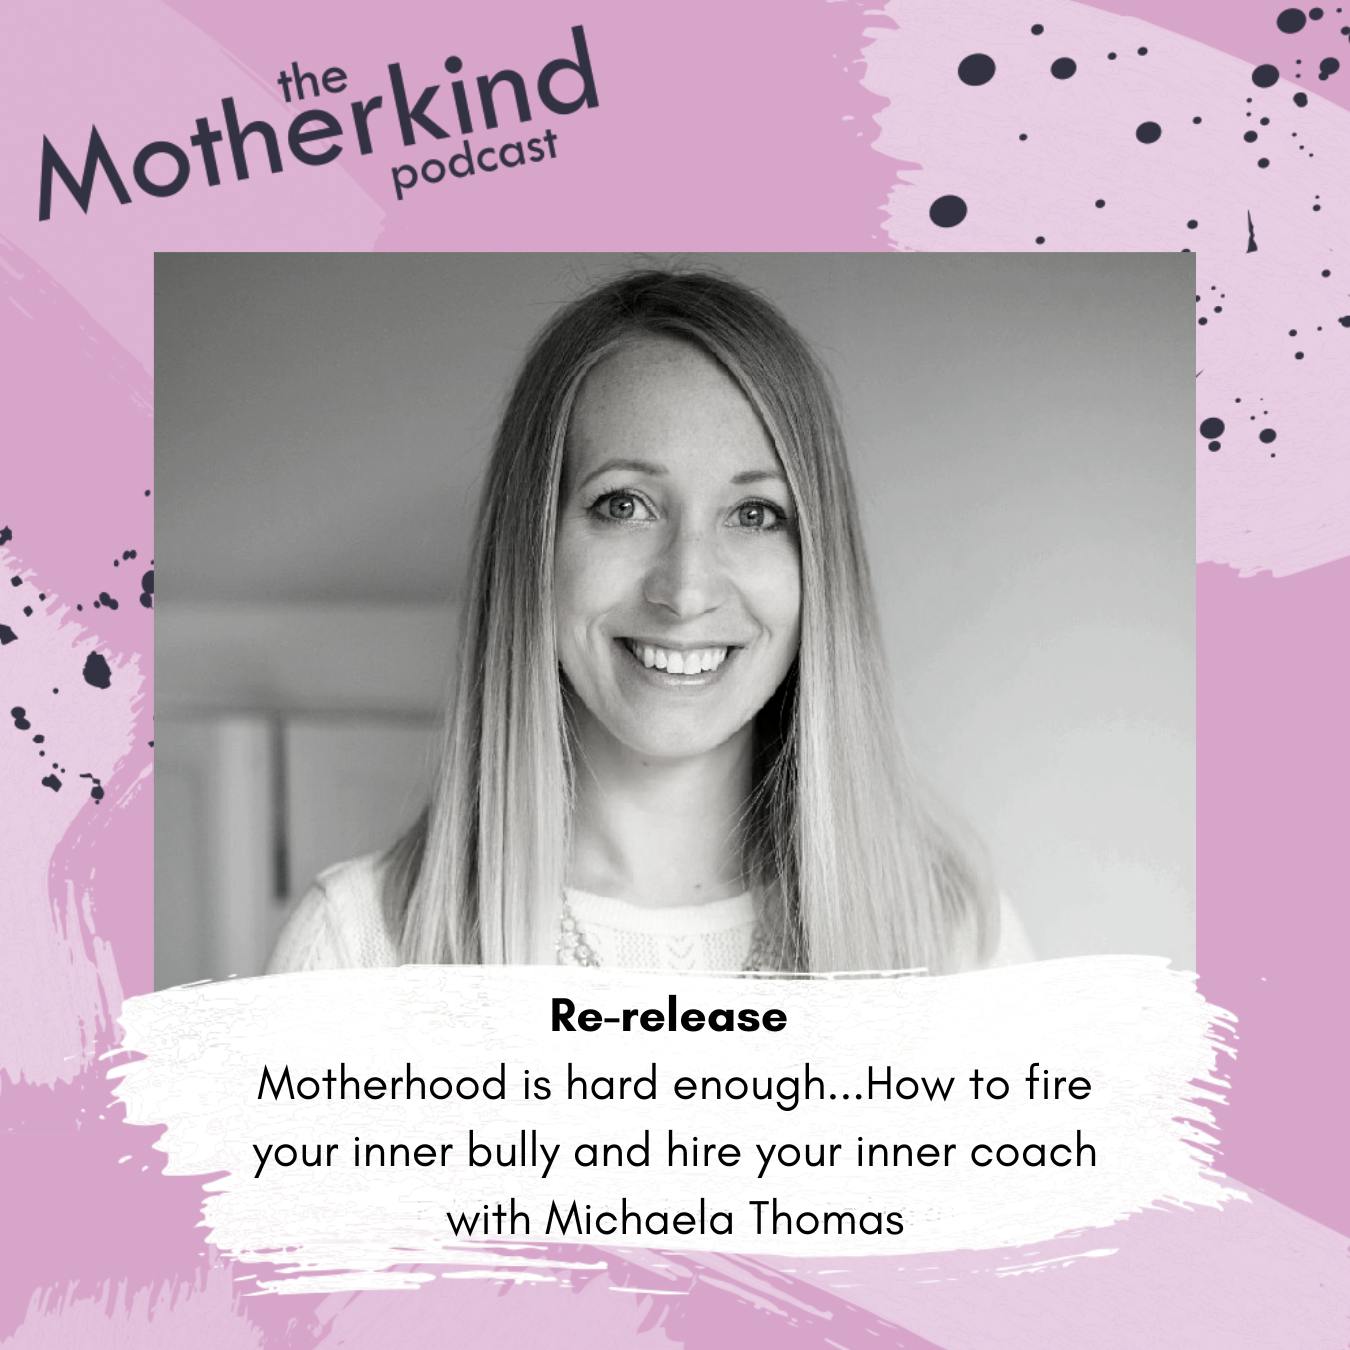 Re-release | Motherhood is hard enough...How to fire your inner bully and hire your inner coach with Michaela Thomas